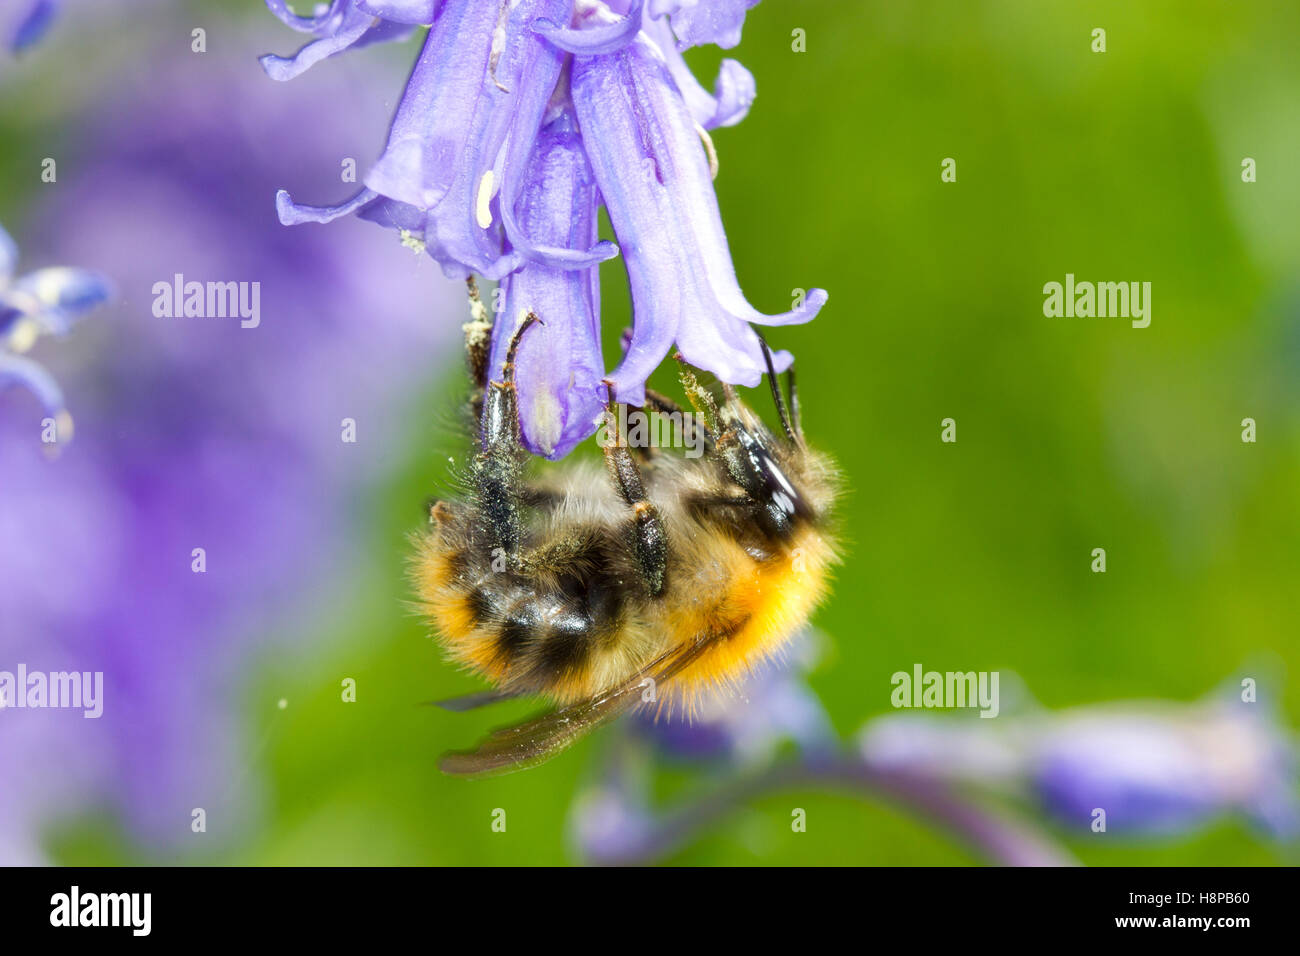 Common Carder Bumblebee (Bombus pascuorum) adult worker feeding in a bluebell (Hyacinthoides non-scripta) flower. Stock Photo